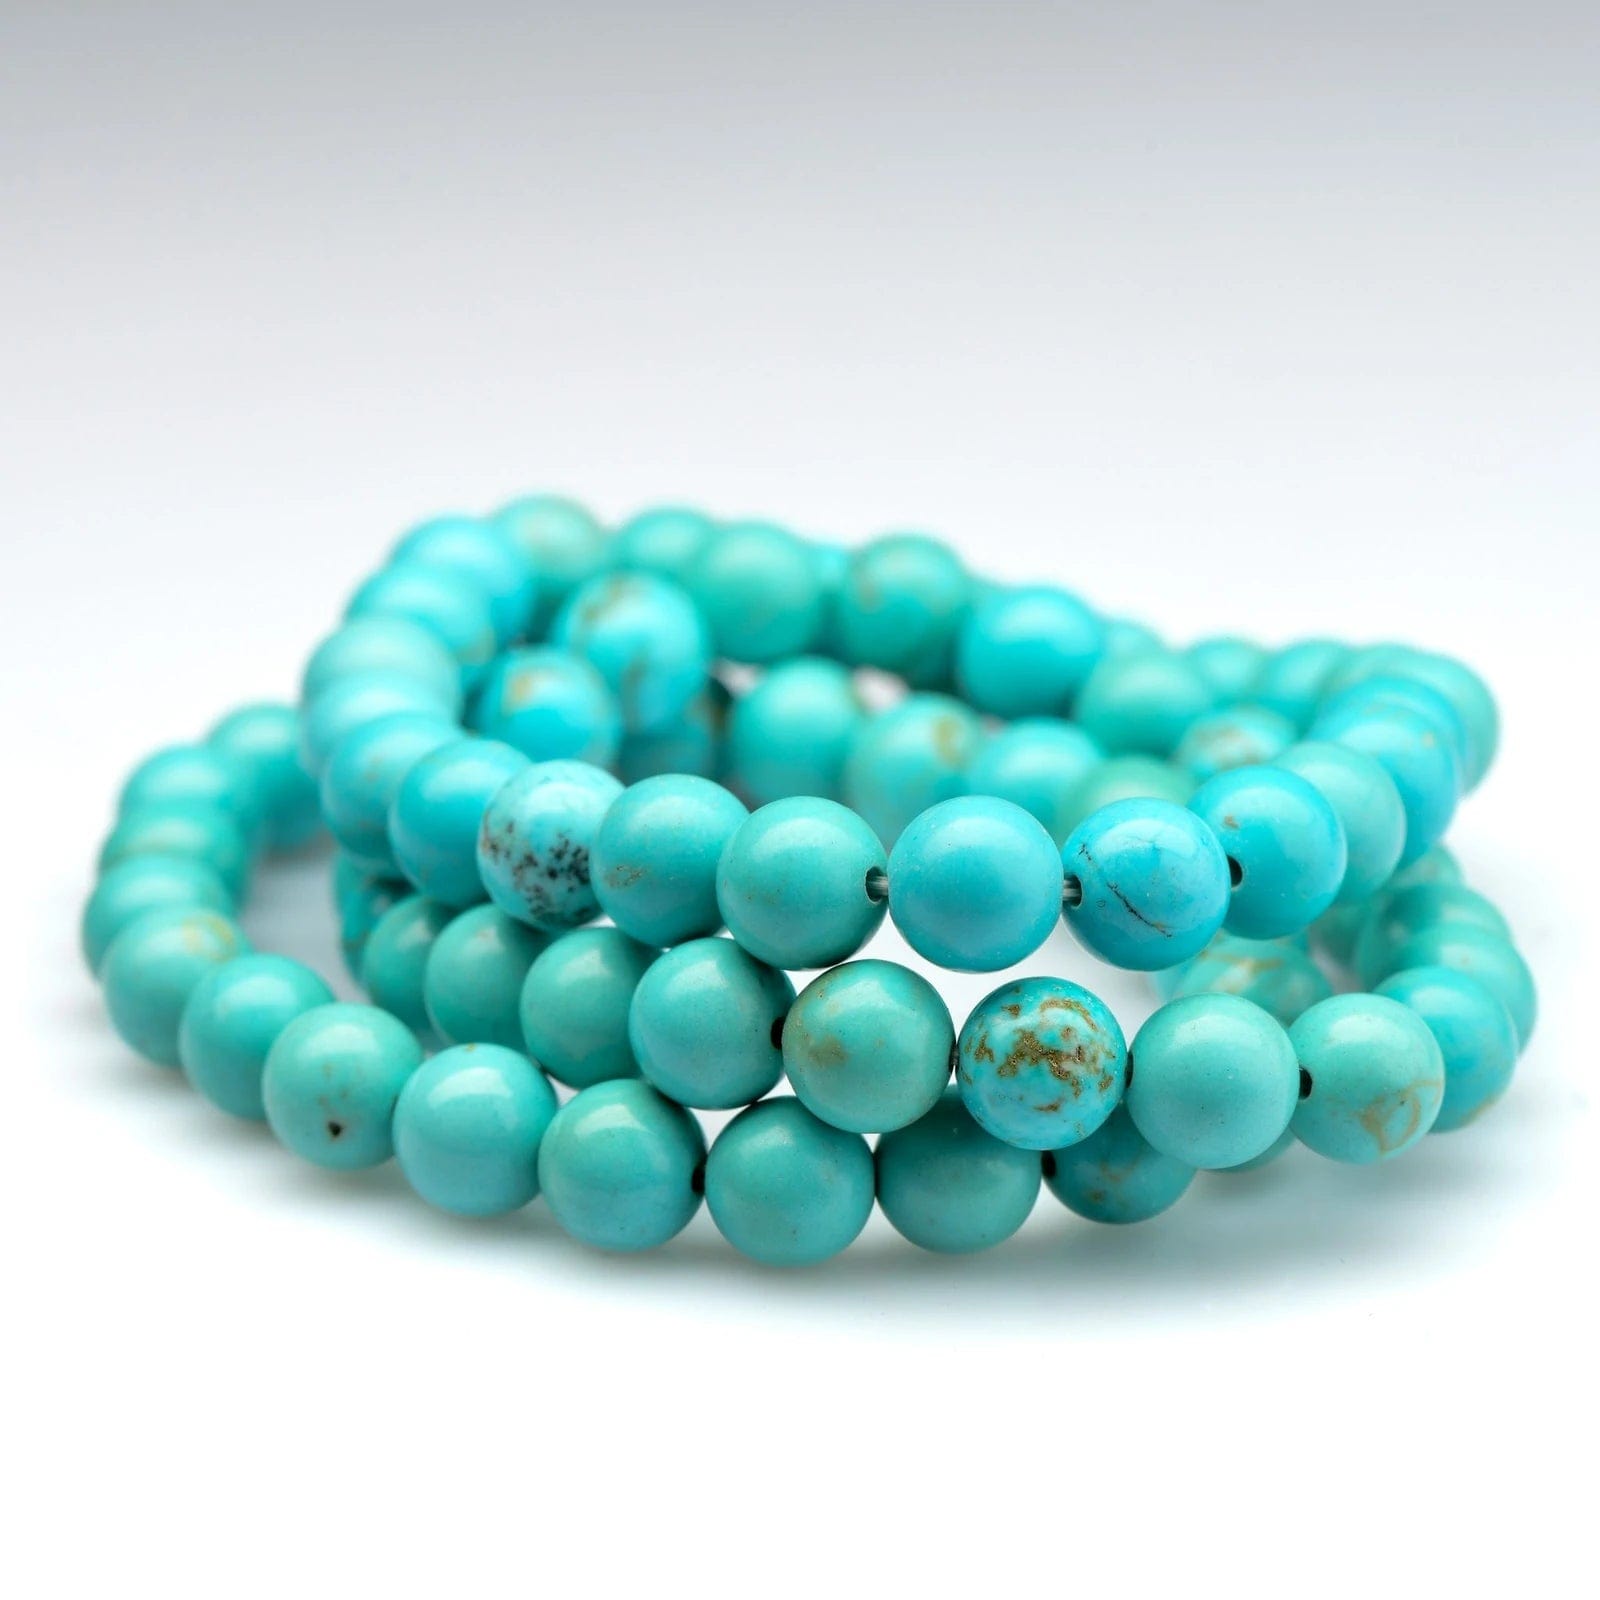 Turquoise Natural Stone Bracelet Natural Crystal Healing Bracelet  Gemstone Bracelet Beaded Bracelet Jewelry for Men 